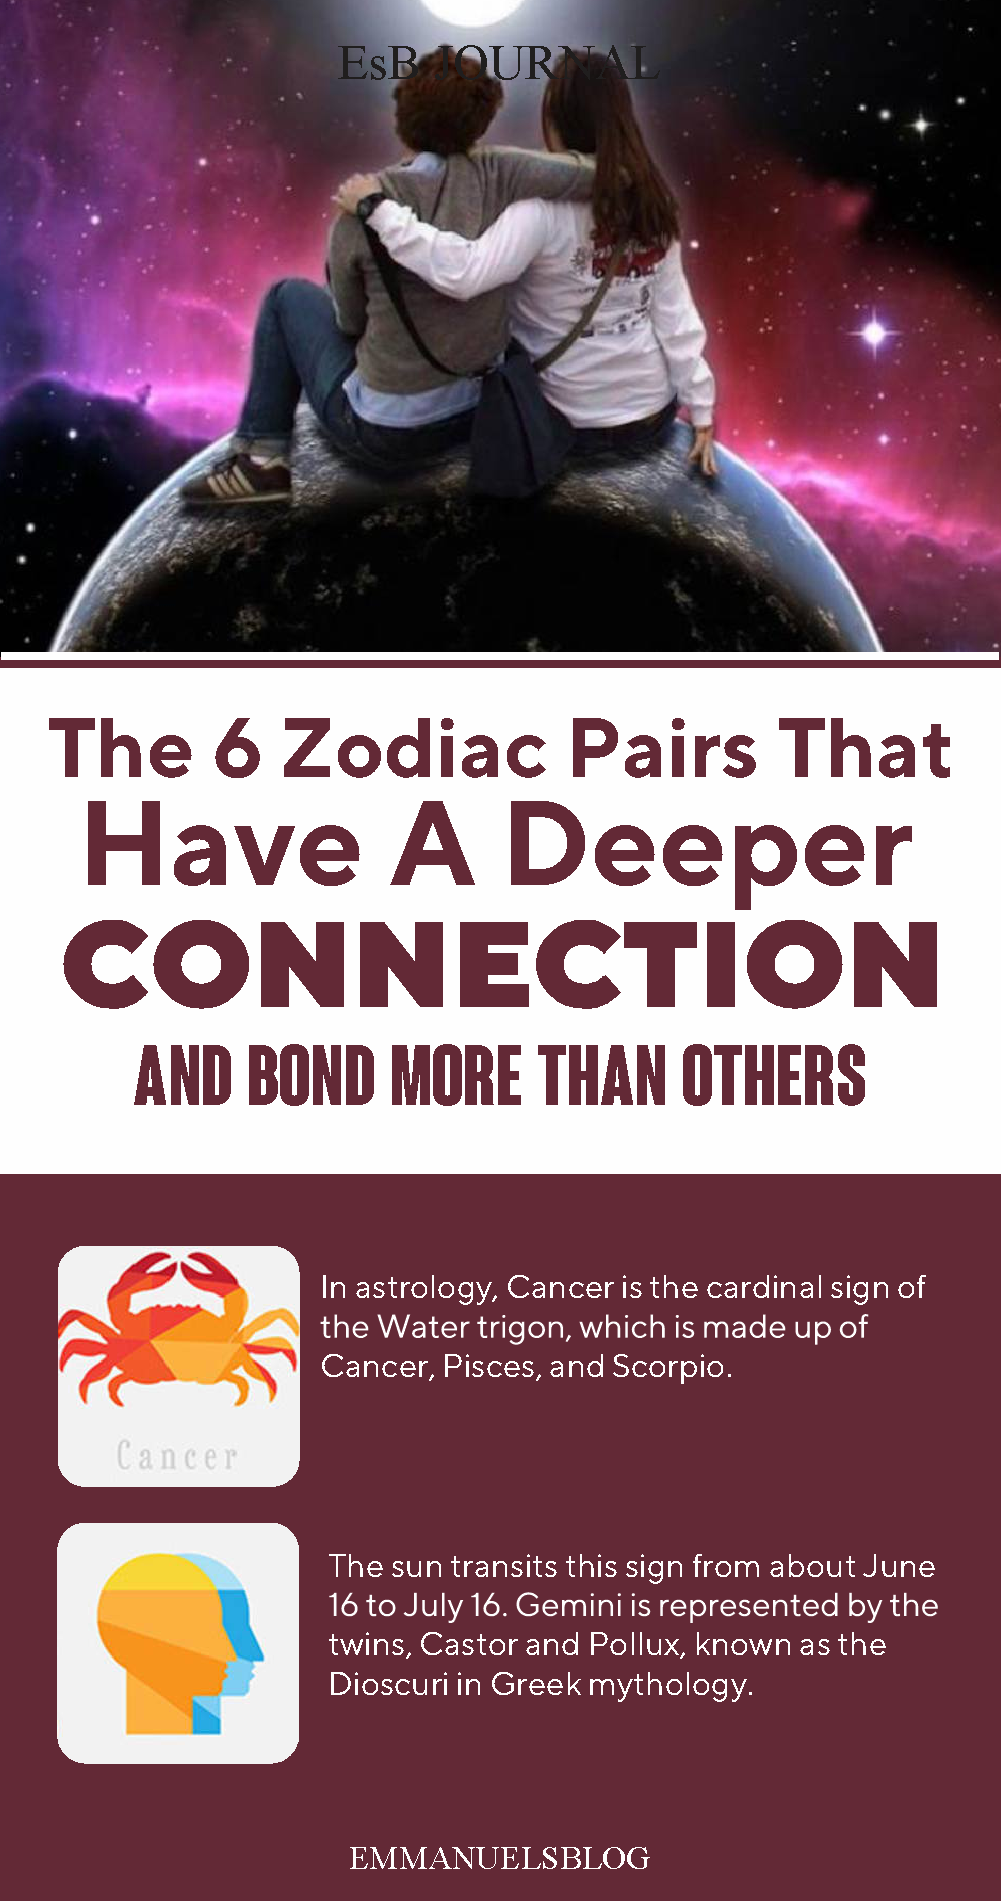 The 6 Zodiac Pairs That Have A Deeper Connection And Bond More Than Others